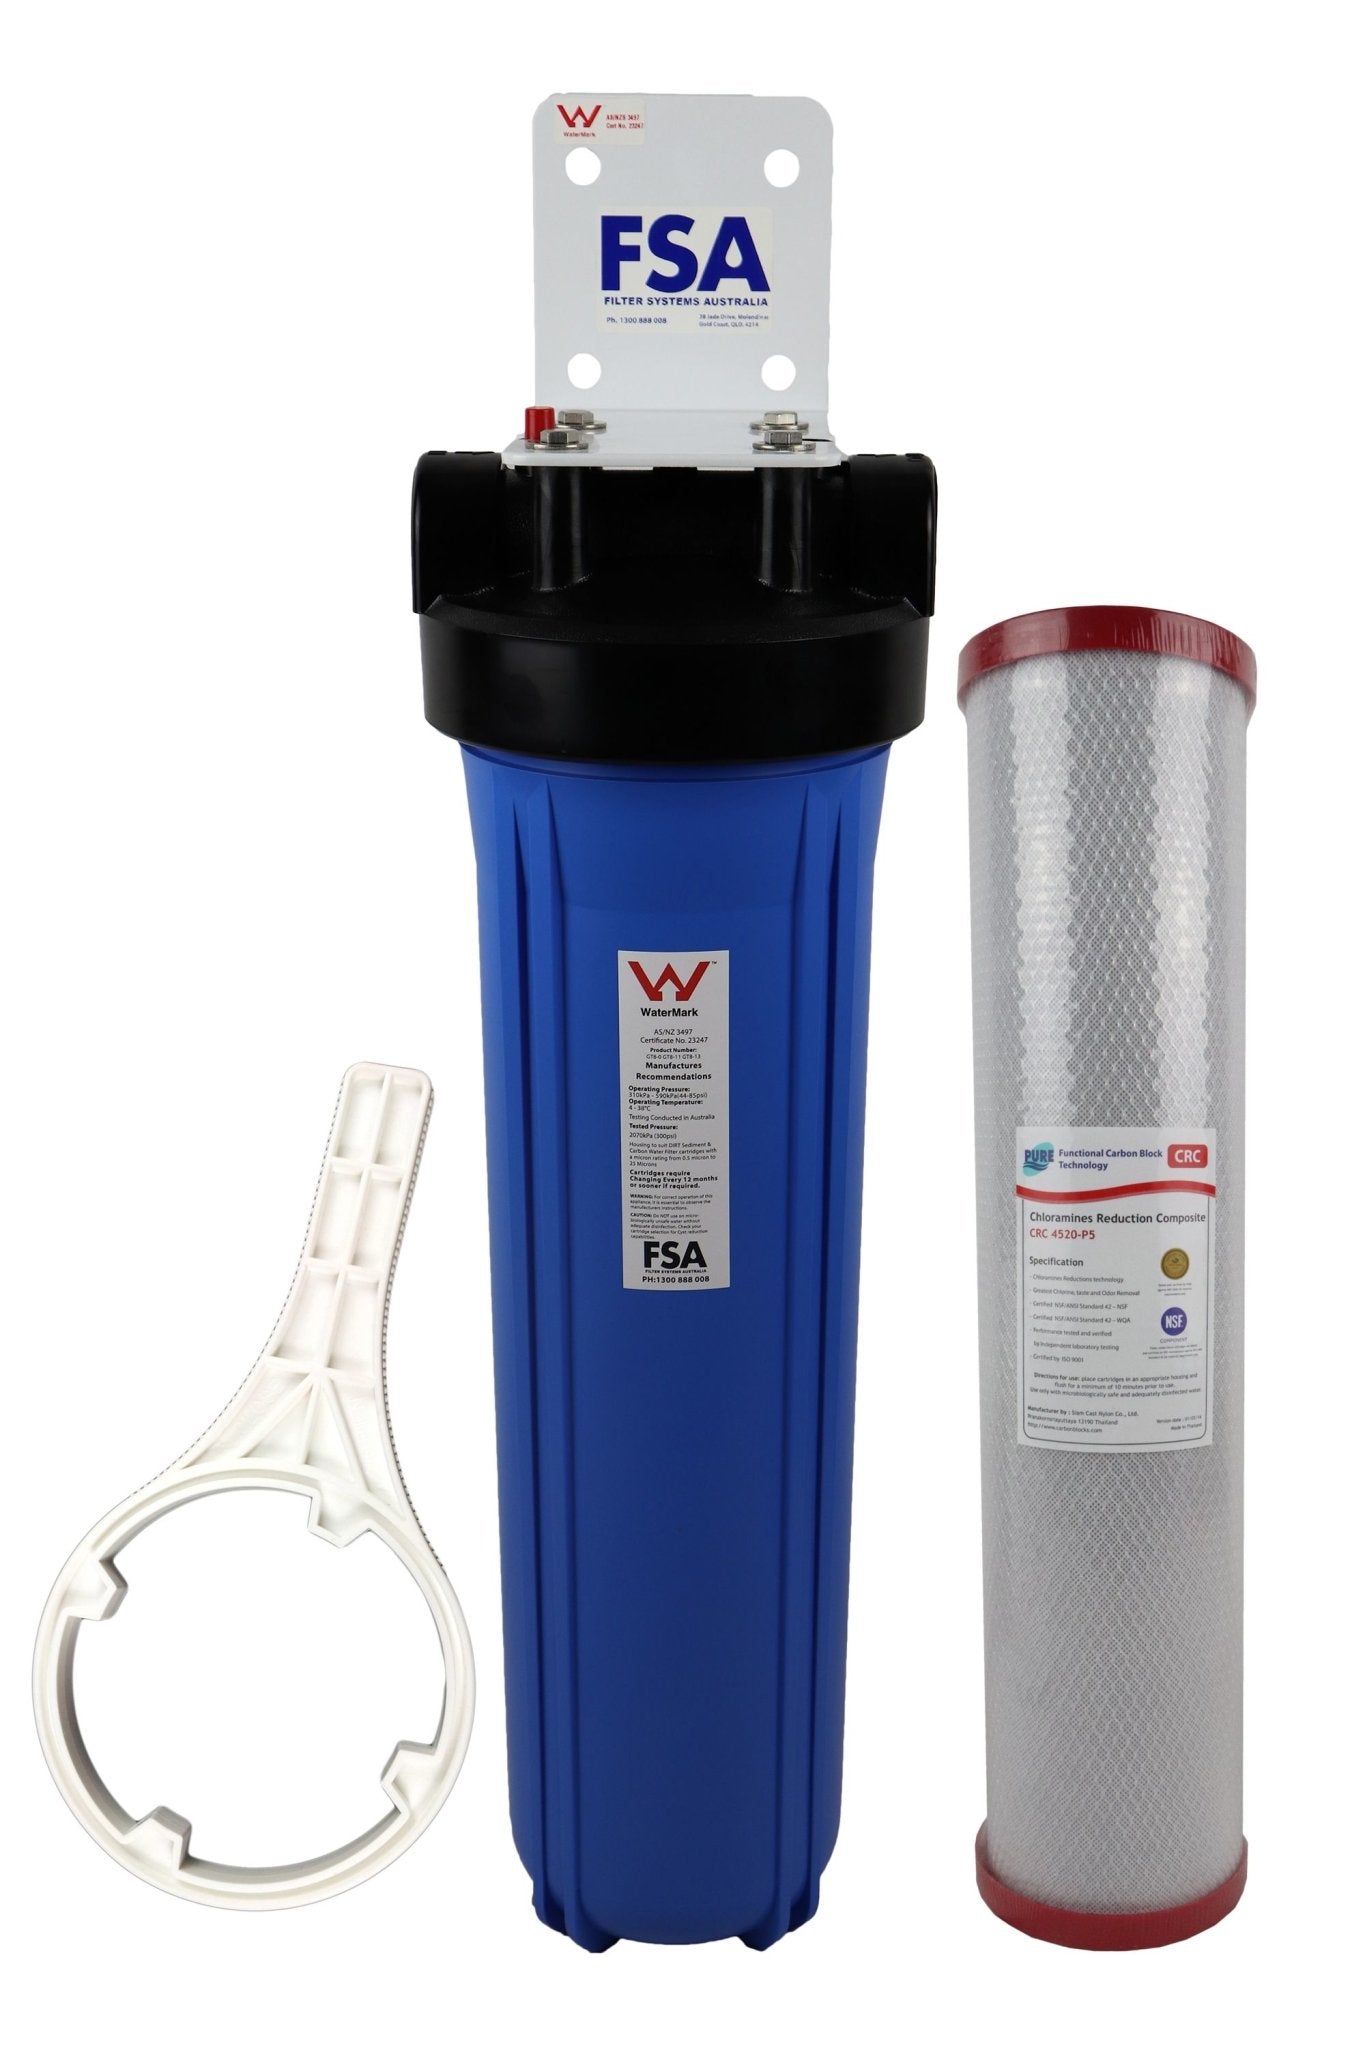 WaterMark Single Whole House Water Filter System | 20" x 4.5" | Big Blue - Water Filter Direct Australia